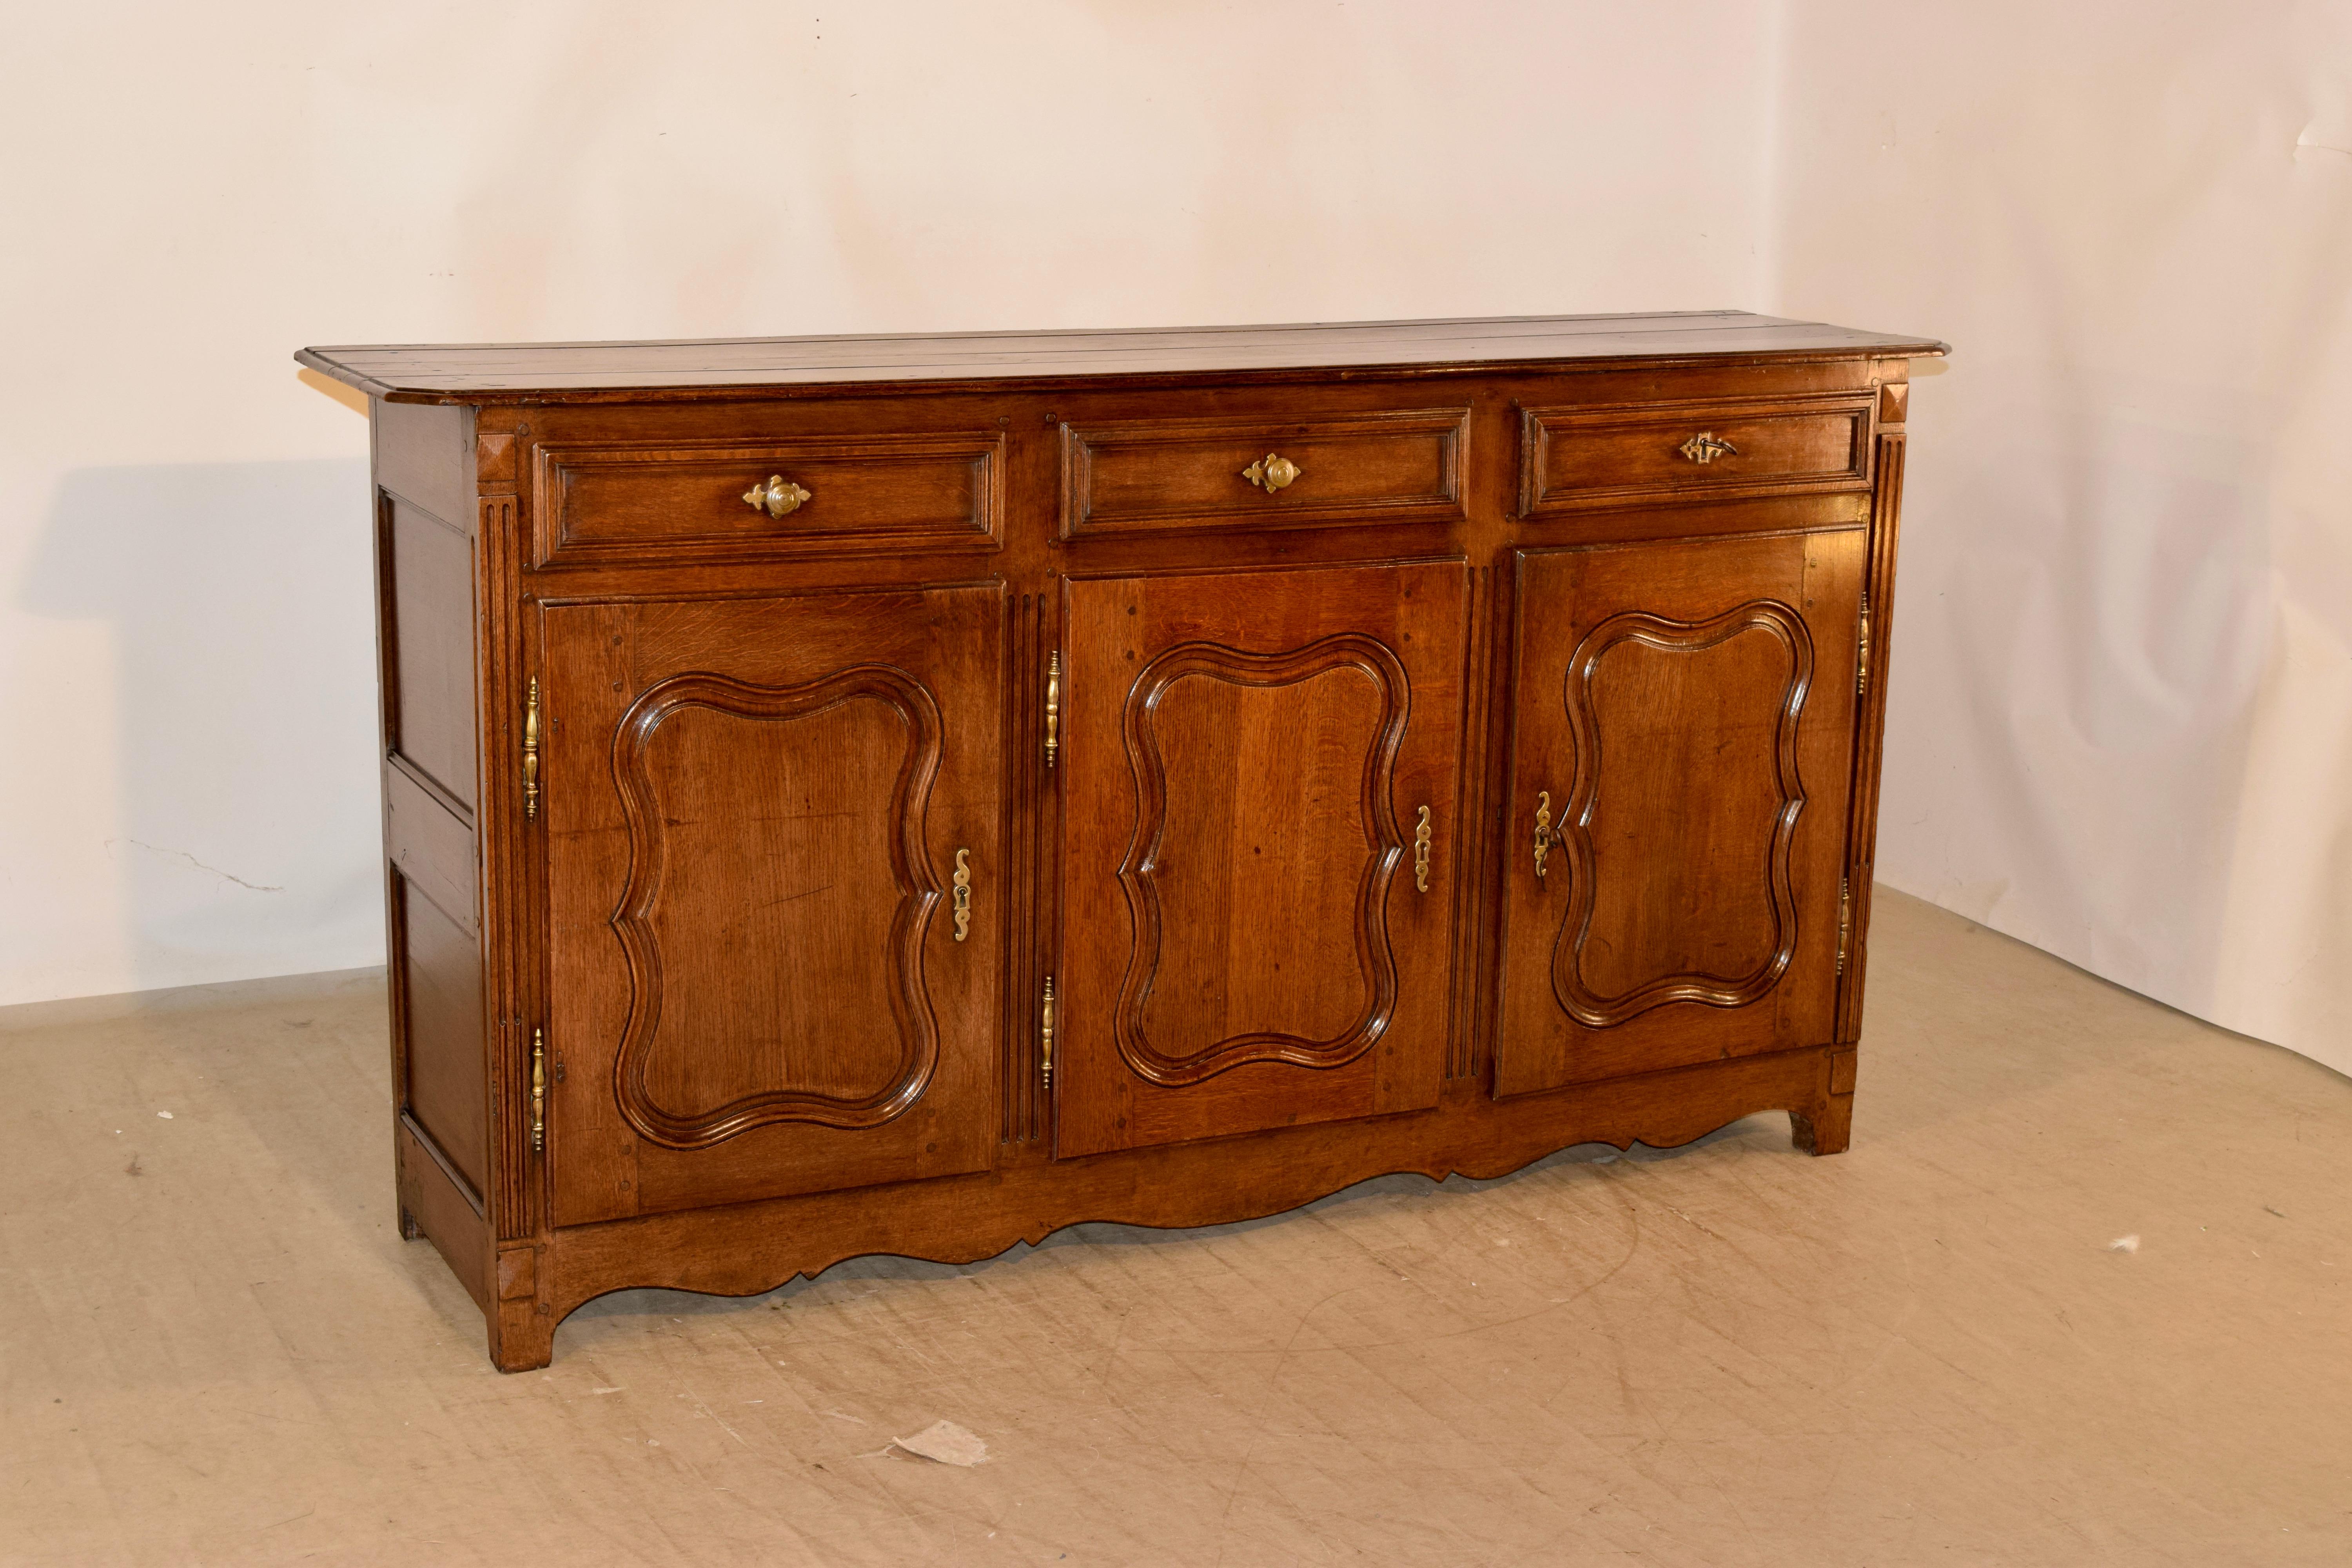 18th century oak enfilade from France with beveled edge around the top and a plate rail along the back. the sides are paneled and the front contains three paneled drawers over three raised paneled doors, which open to reveal storage. There is a